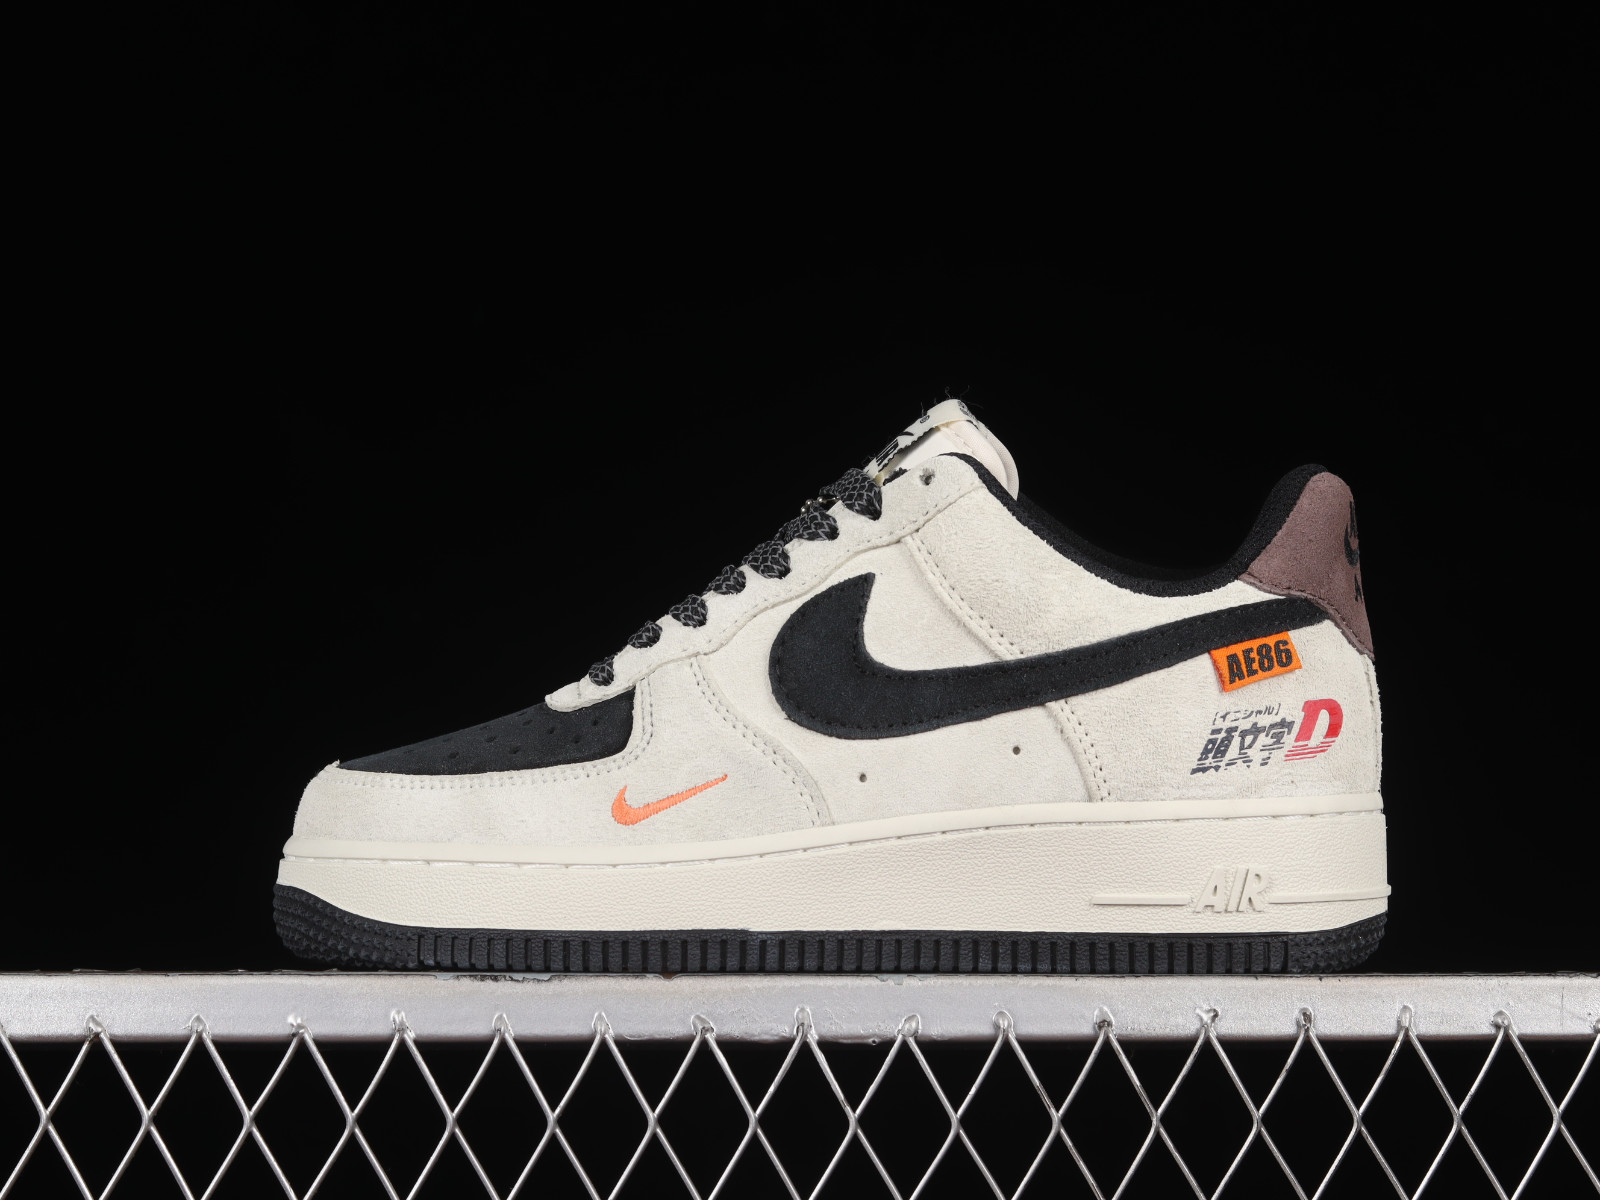 BioenergylistsShops - 801 - Nike Air Force 1 07 Low AE86 Suede Black Brown  BS9055 - nike retro assaults women black friday images